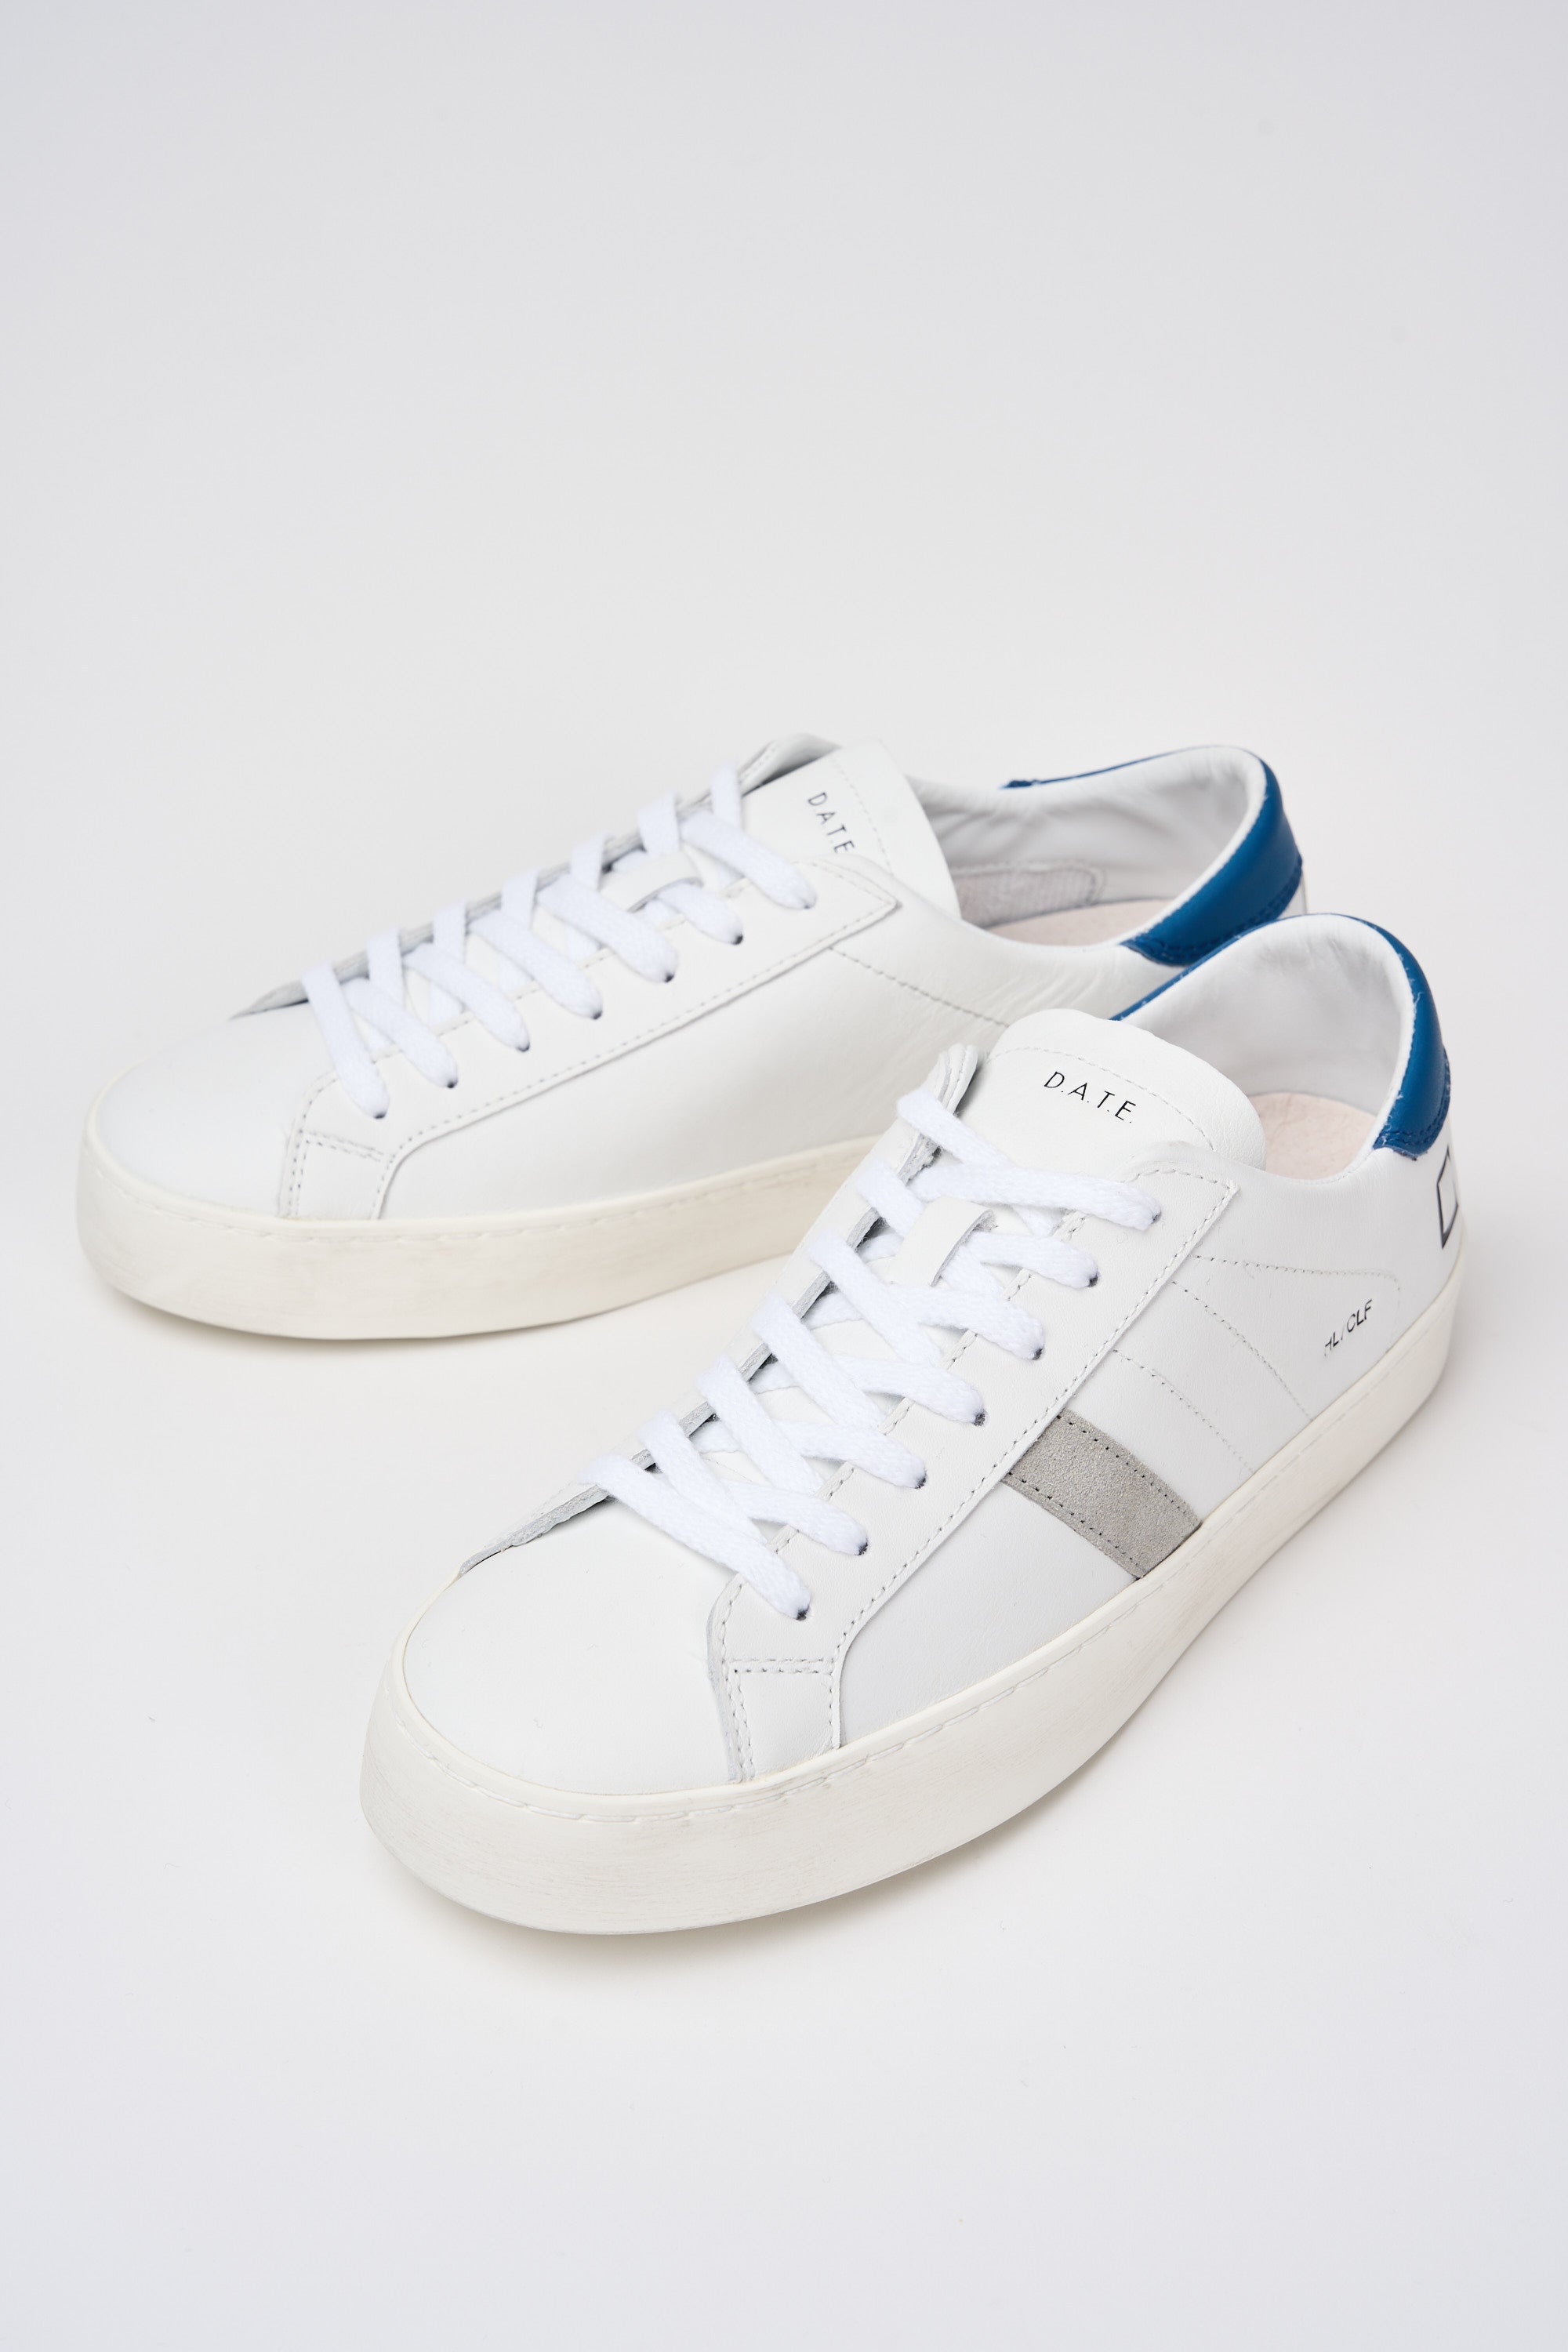 D.A.T.E. Sneaker Hill Leather/Suede White/Blue-7